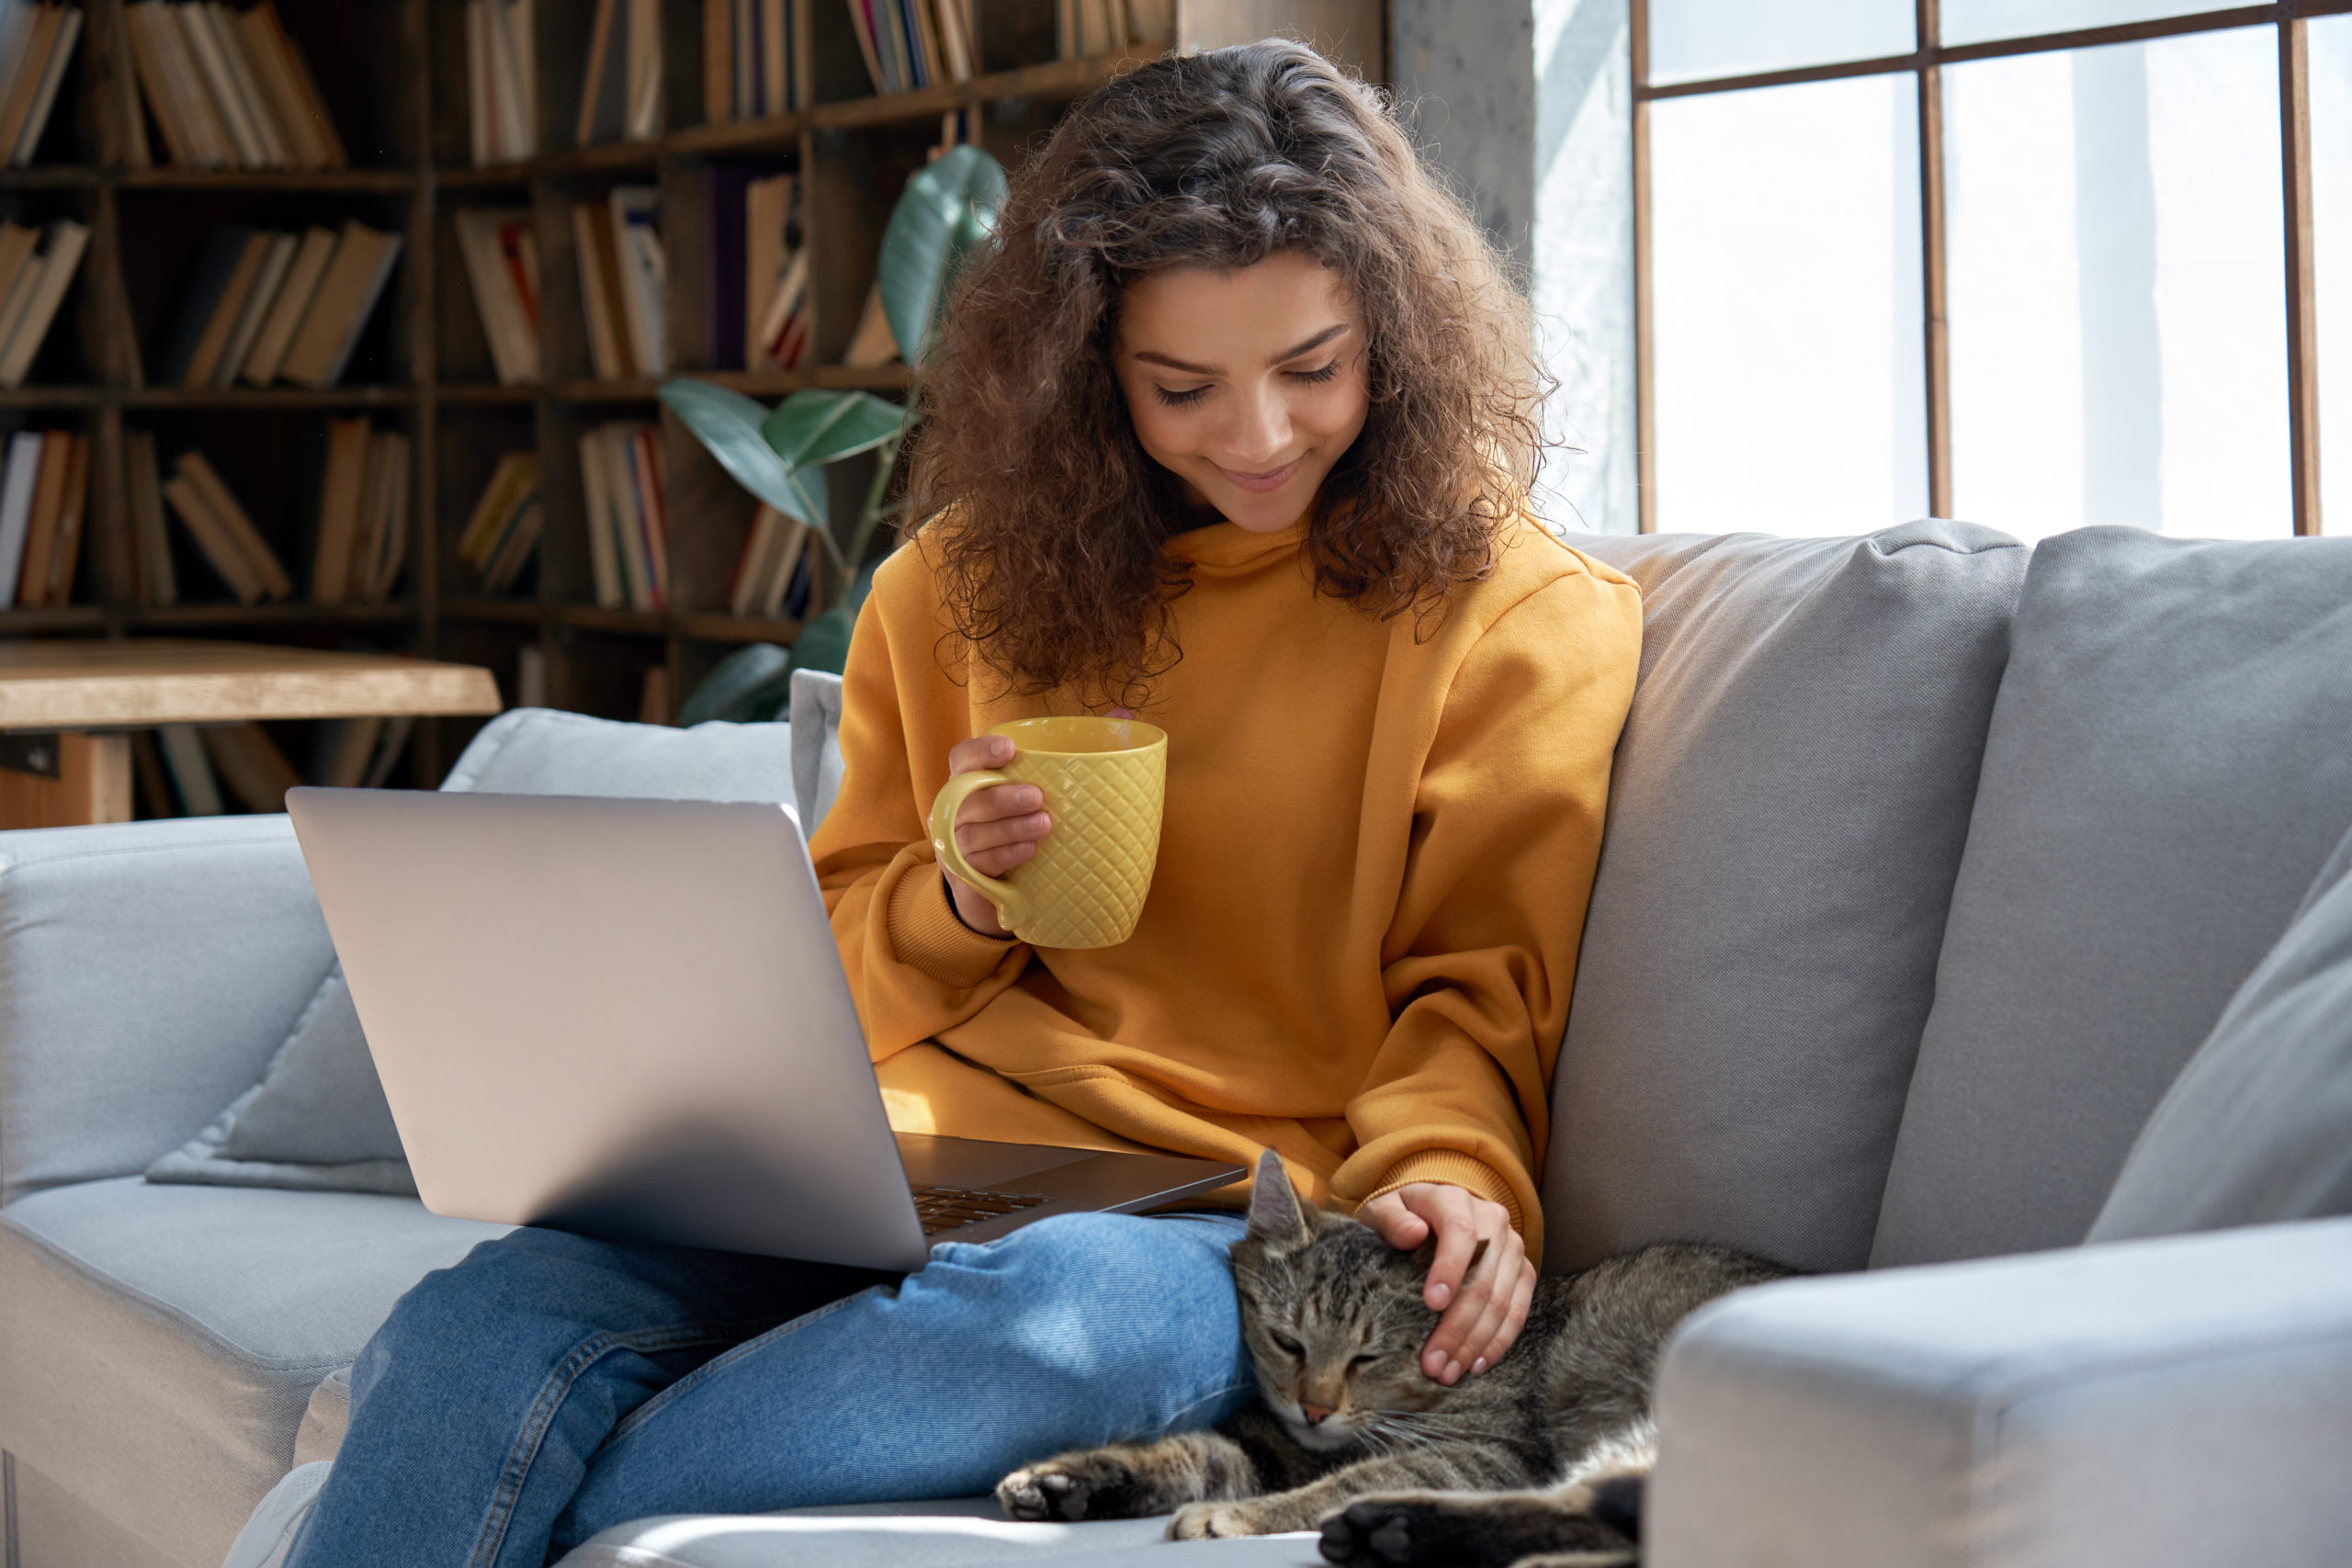 Remote worker sitting on a sofa enjoying her coffee making the most of her wellbeing